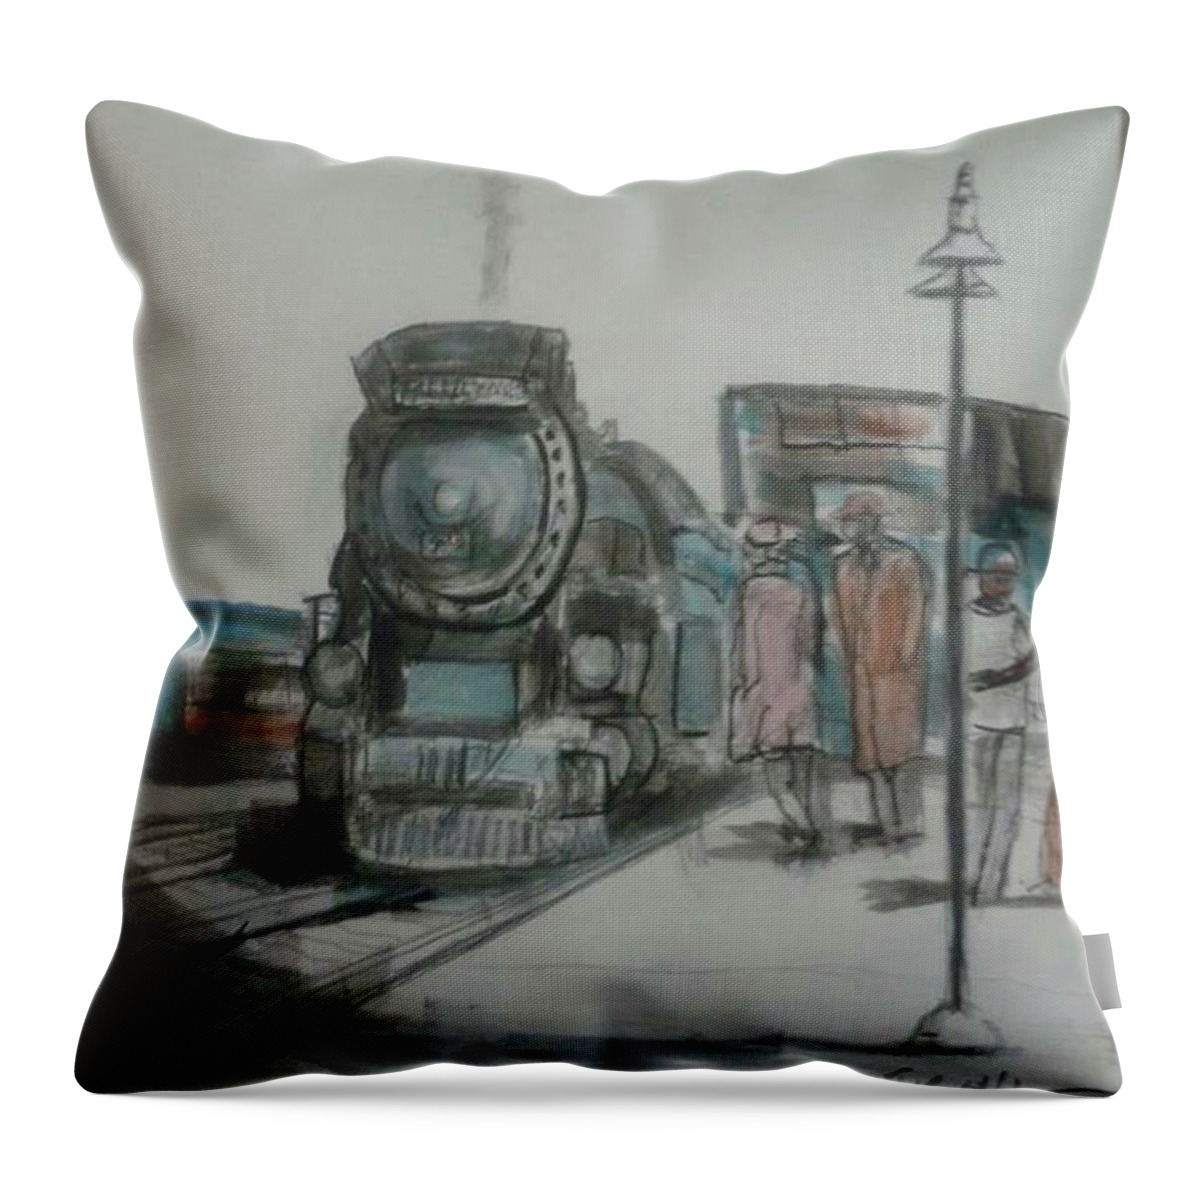 Blue Comet Train Throw Pillow featuring the painting The Blue Comet Train by Tyrone Hart